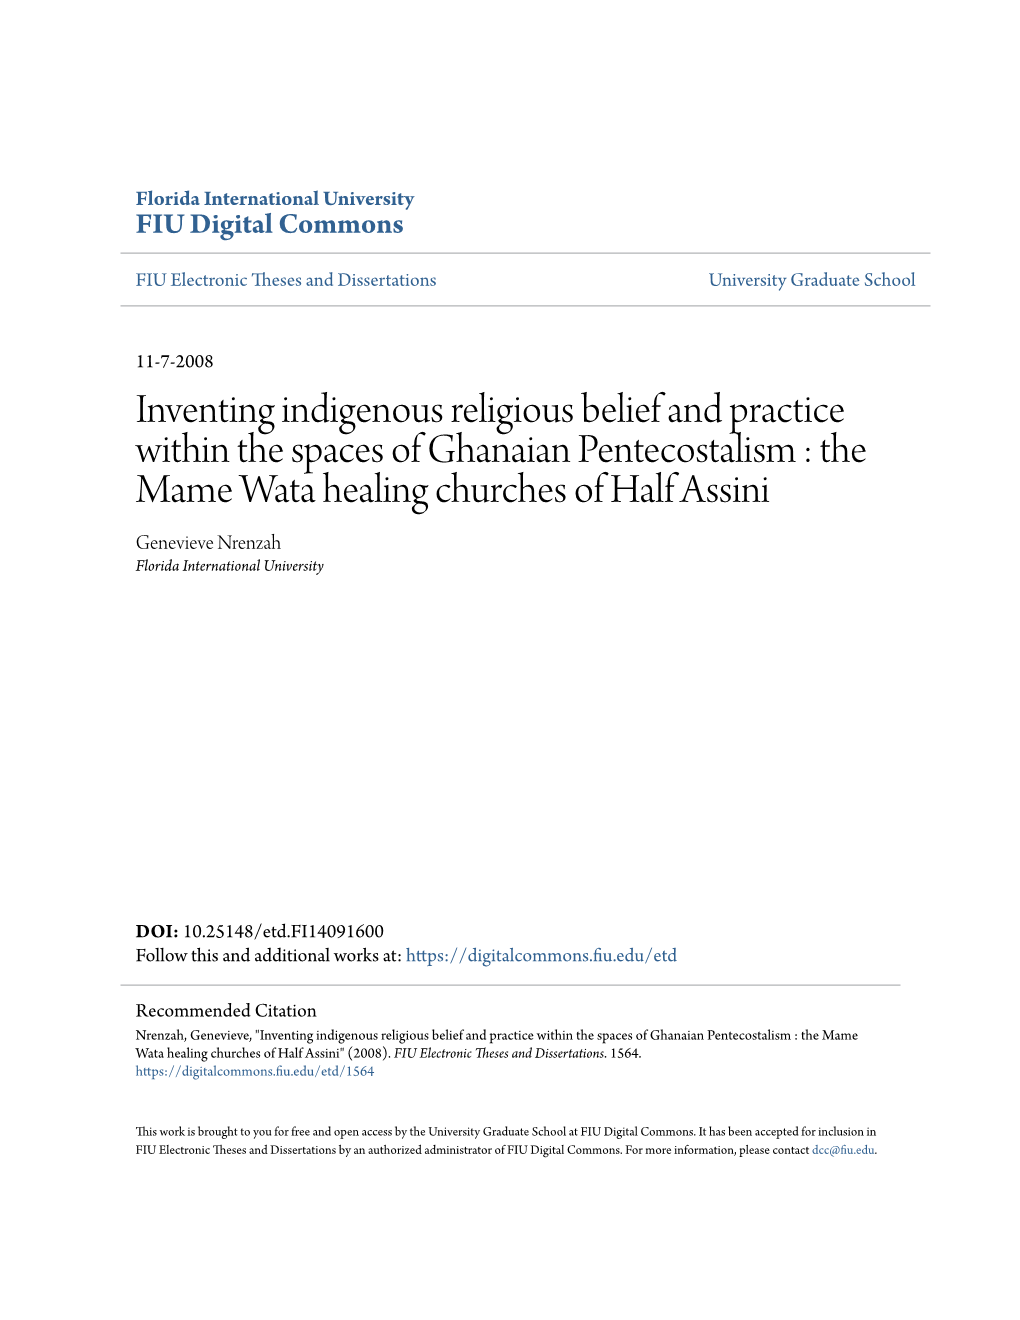 Inventing Indigenous Religious Belief and Practice Within the Spaces Of